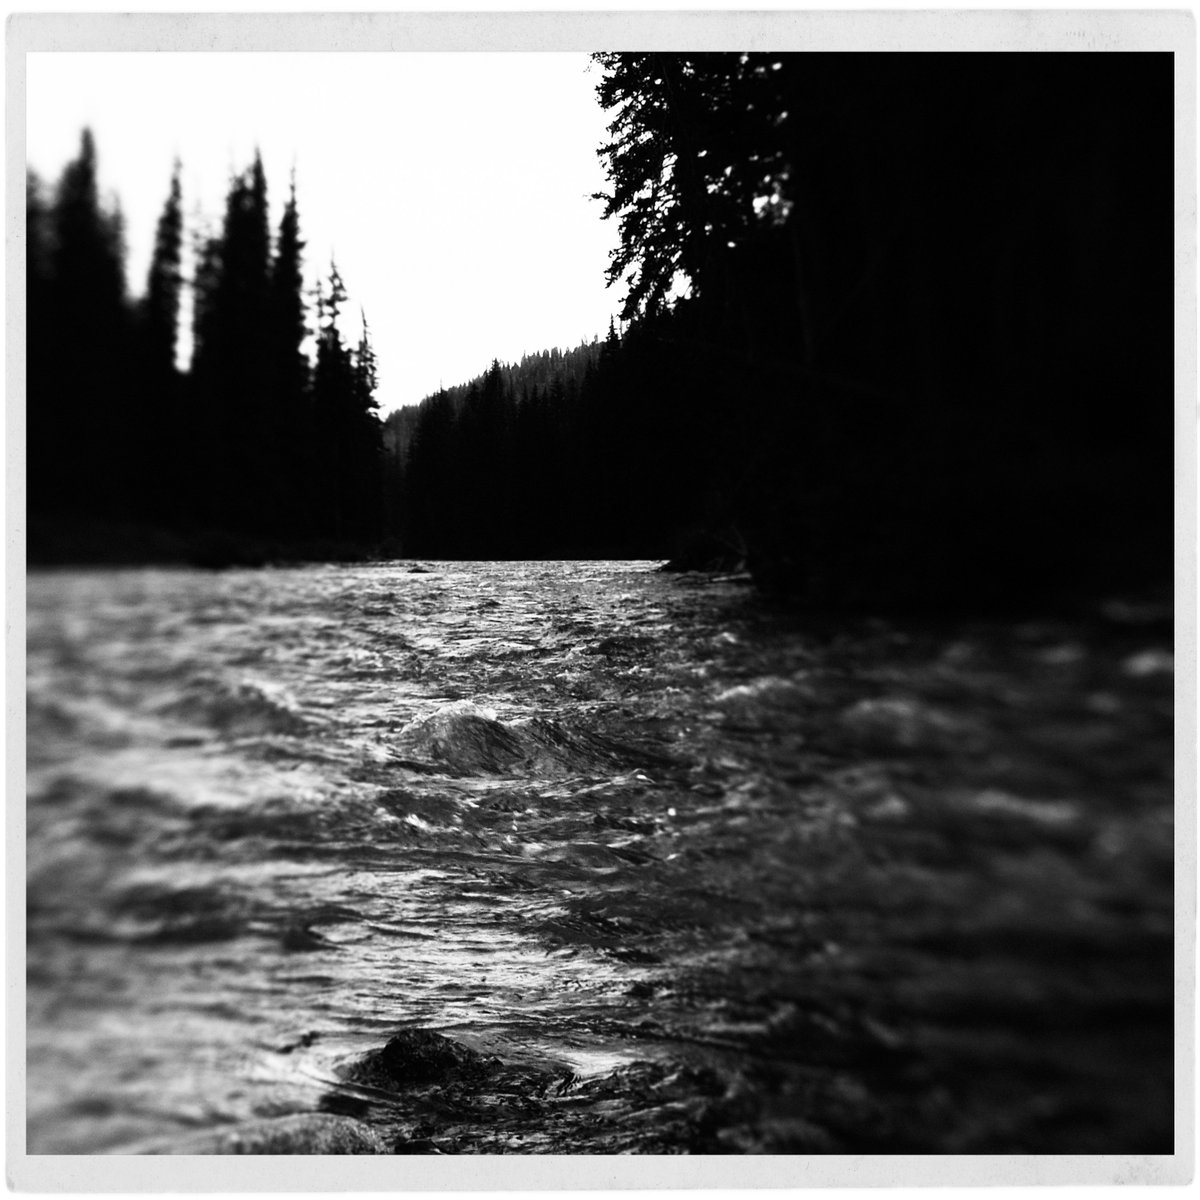 Stress equals creativity
Title: Wyoming Blur Stream
Status: Private Sale Pending
#photograghy #bwphotography